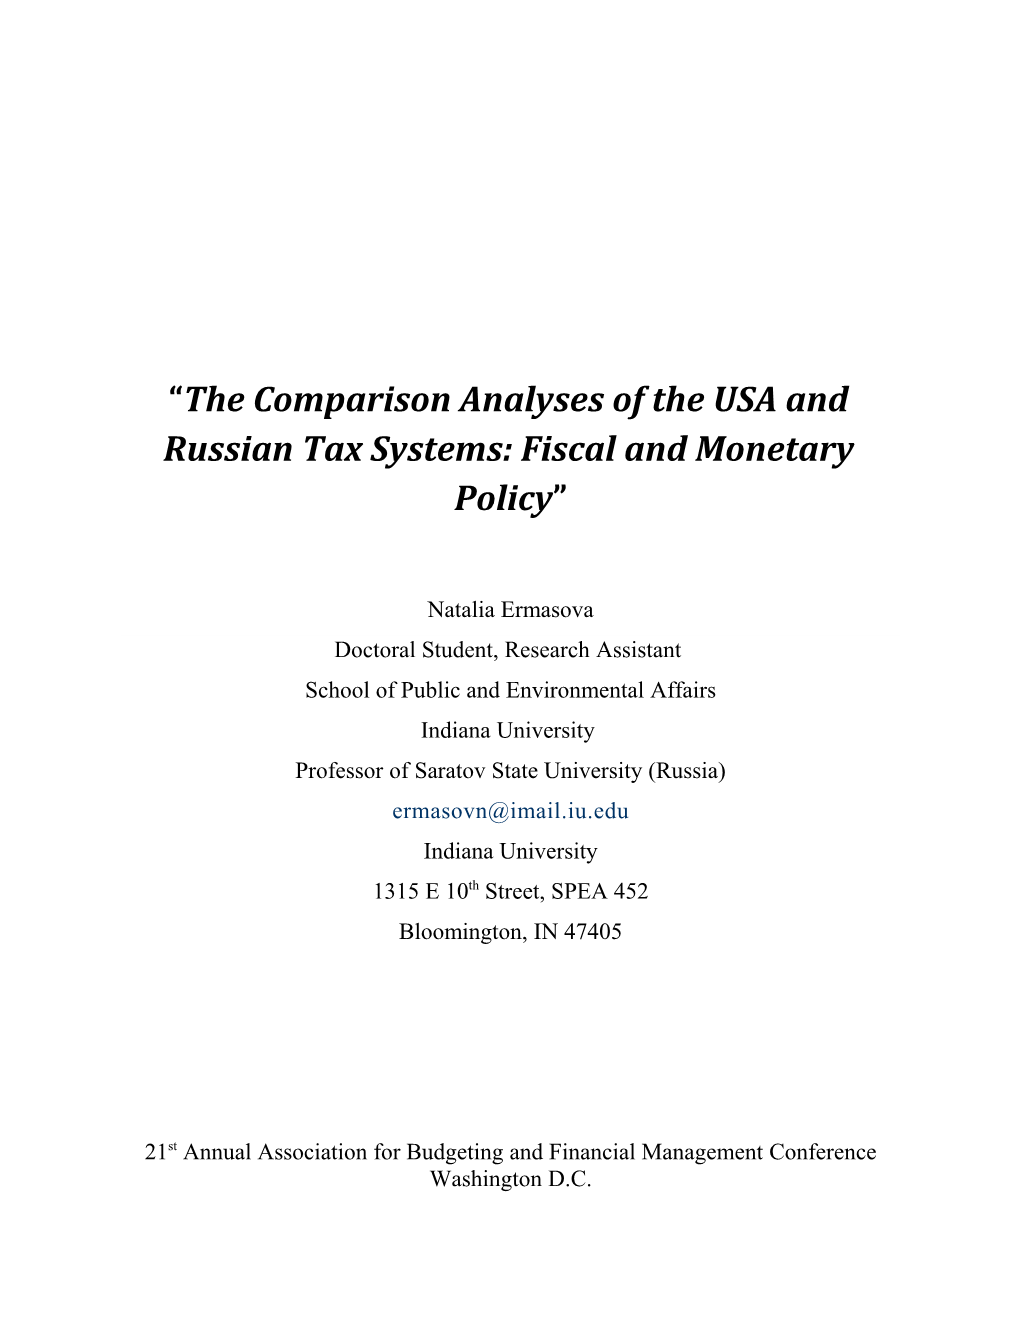 The Comparison Analyses of the USA and Russian Tax Systems: Fiscal and Monetary Policy